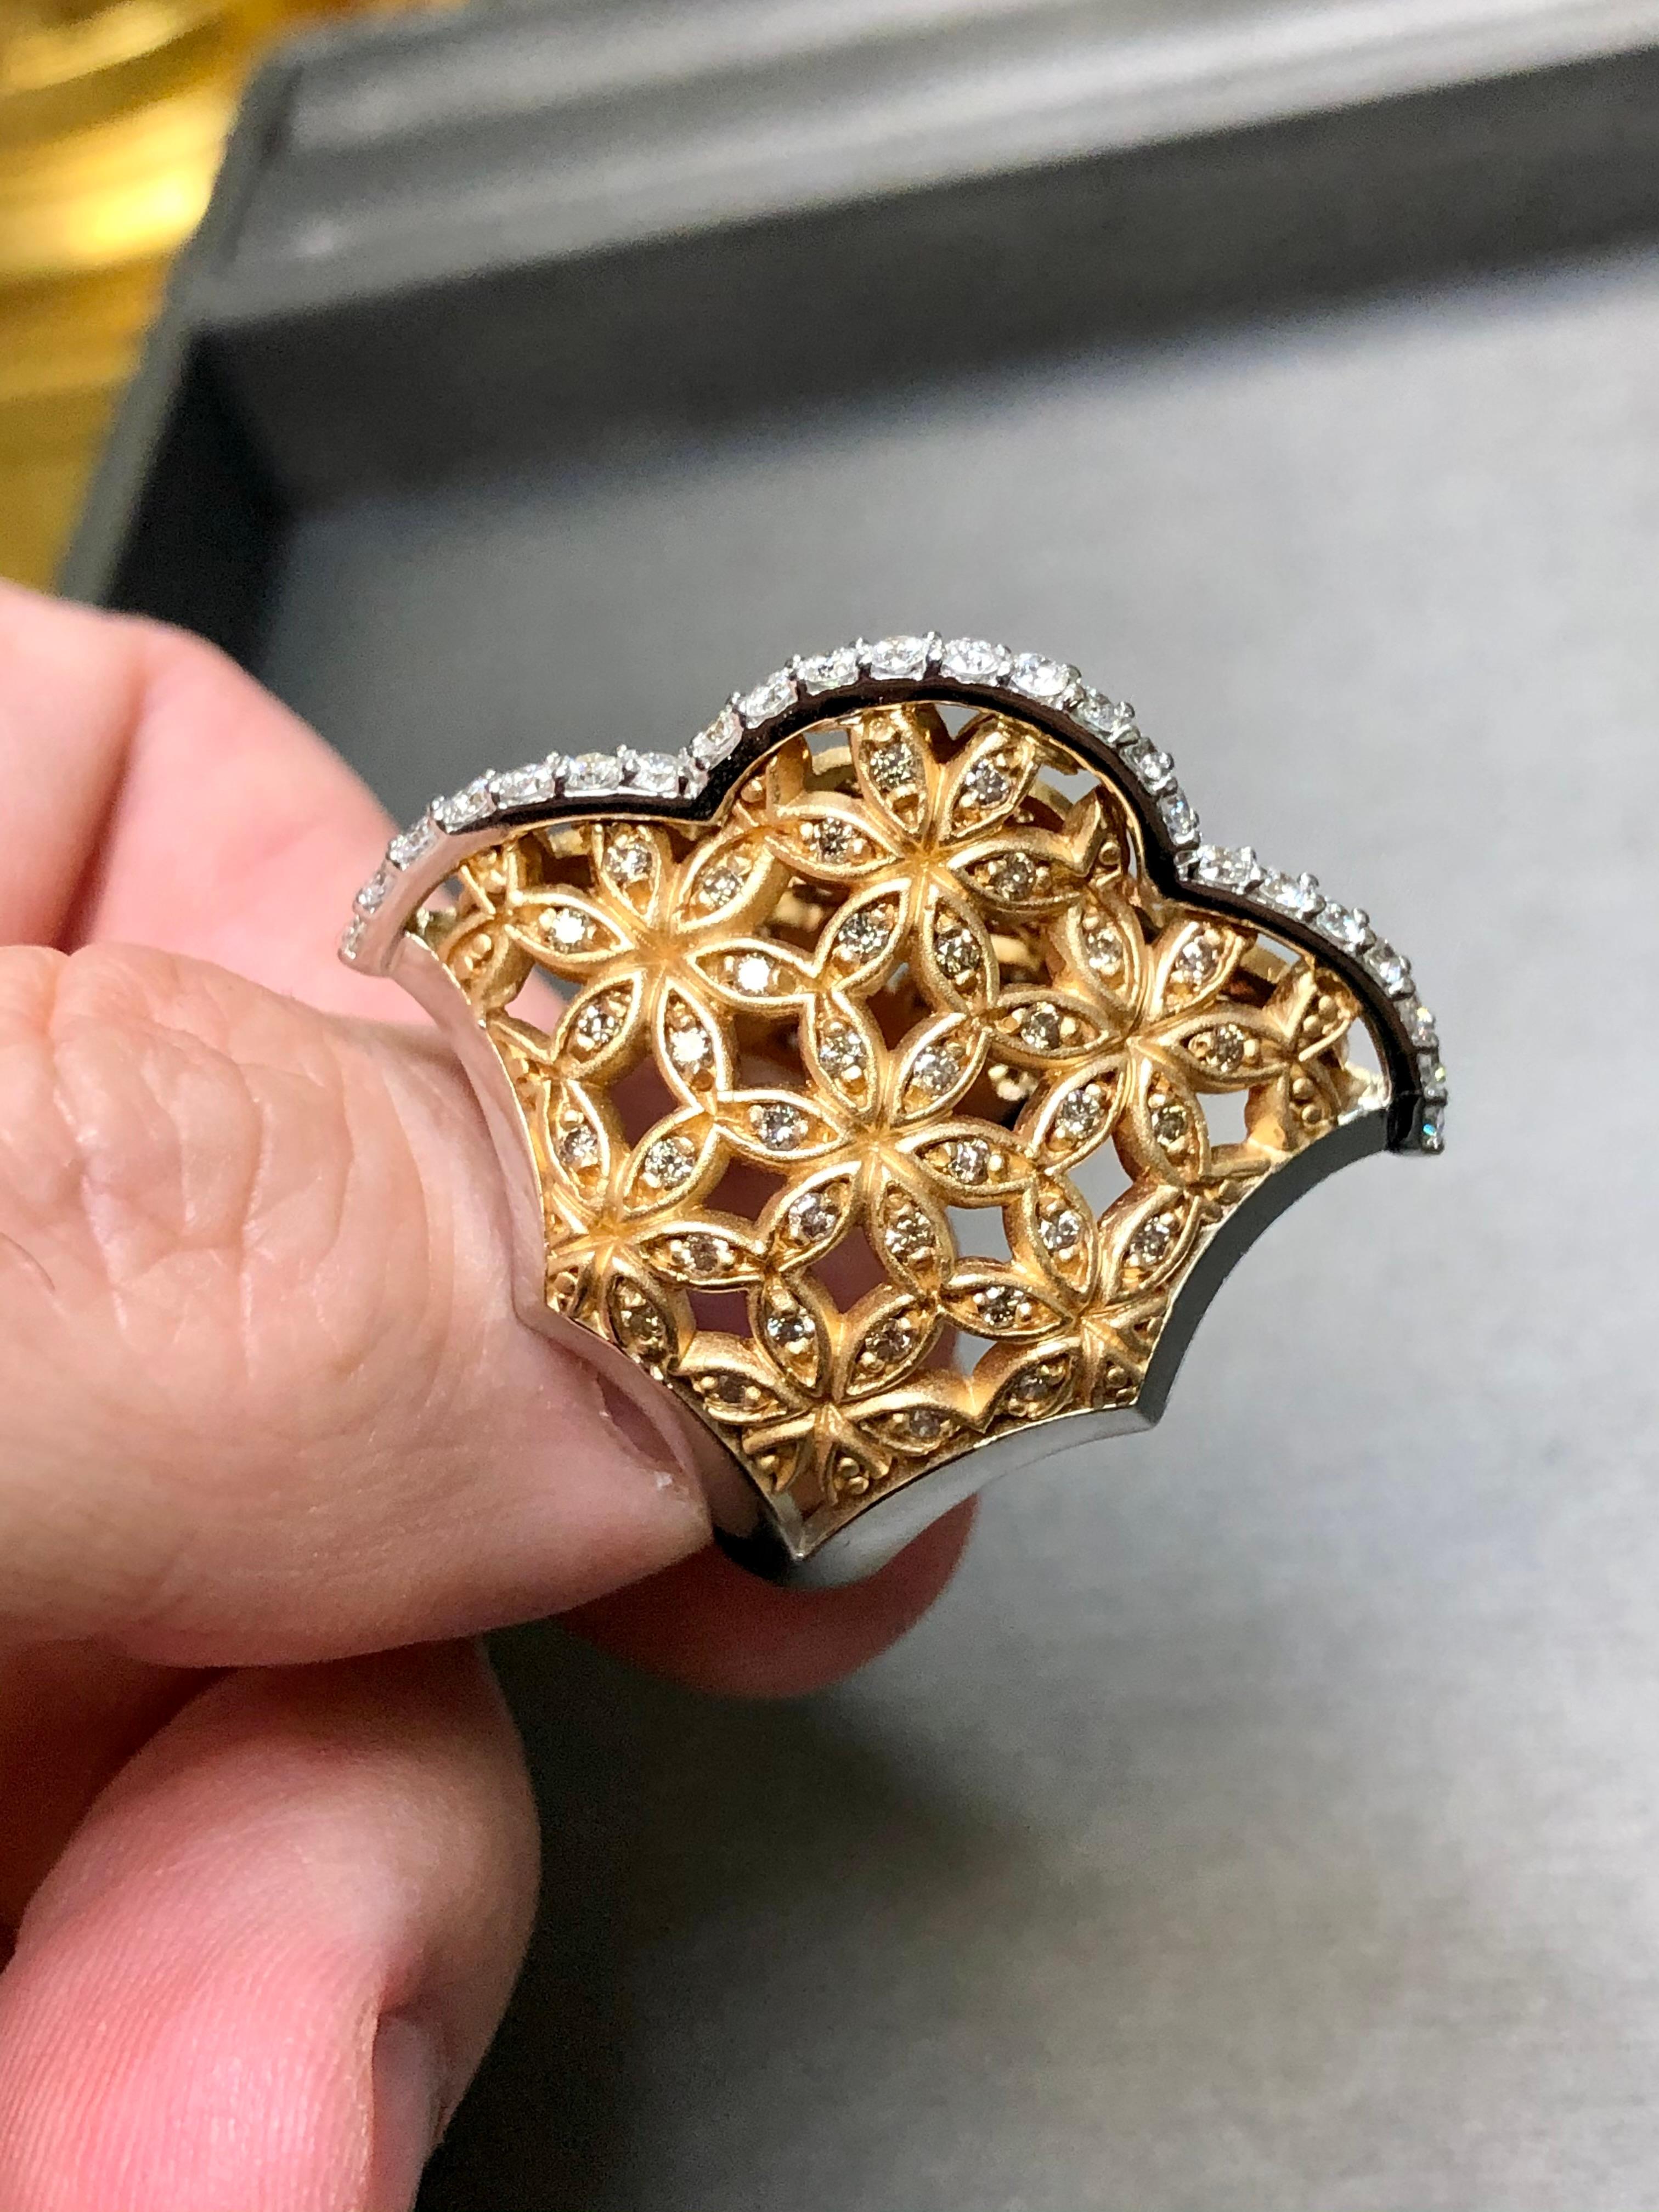 This gorgeously bold ring done by Turkish designer Armaggan has been crafted in 18K white a rose gold and set with approximately .46cttw in F-G color Vs1-2 clarity round diamonds as well as approximately .78cttw in fancy brown diamonds also being